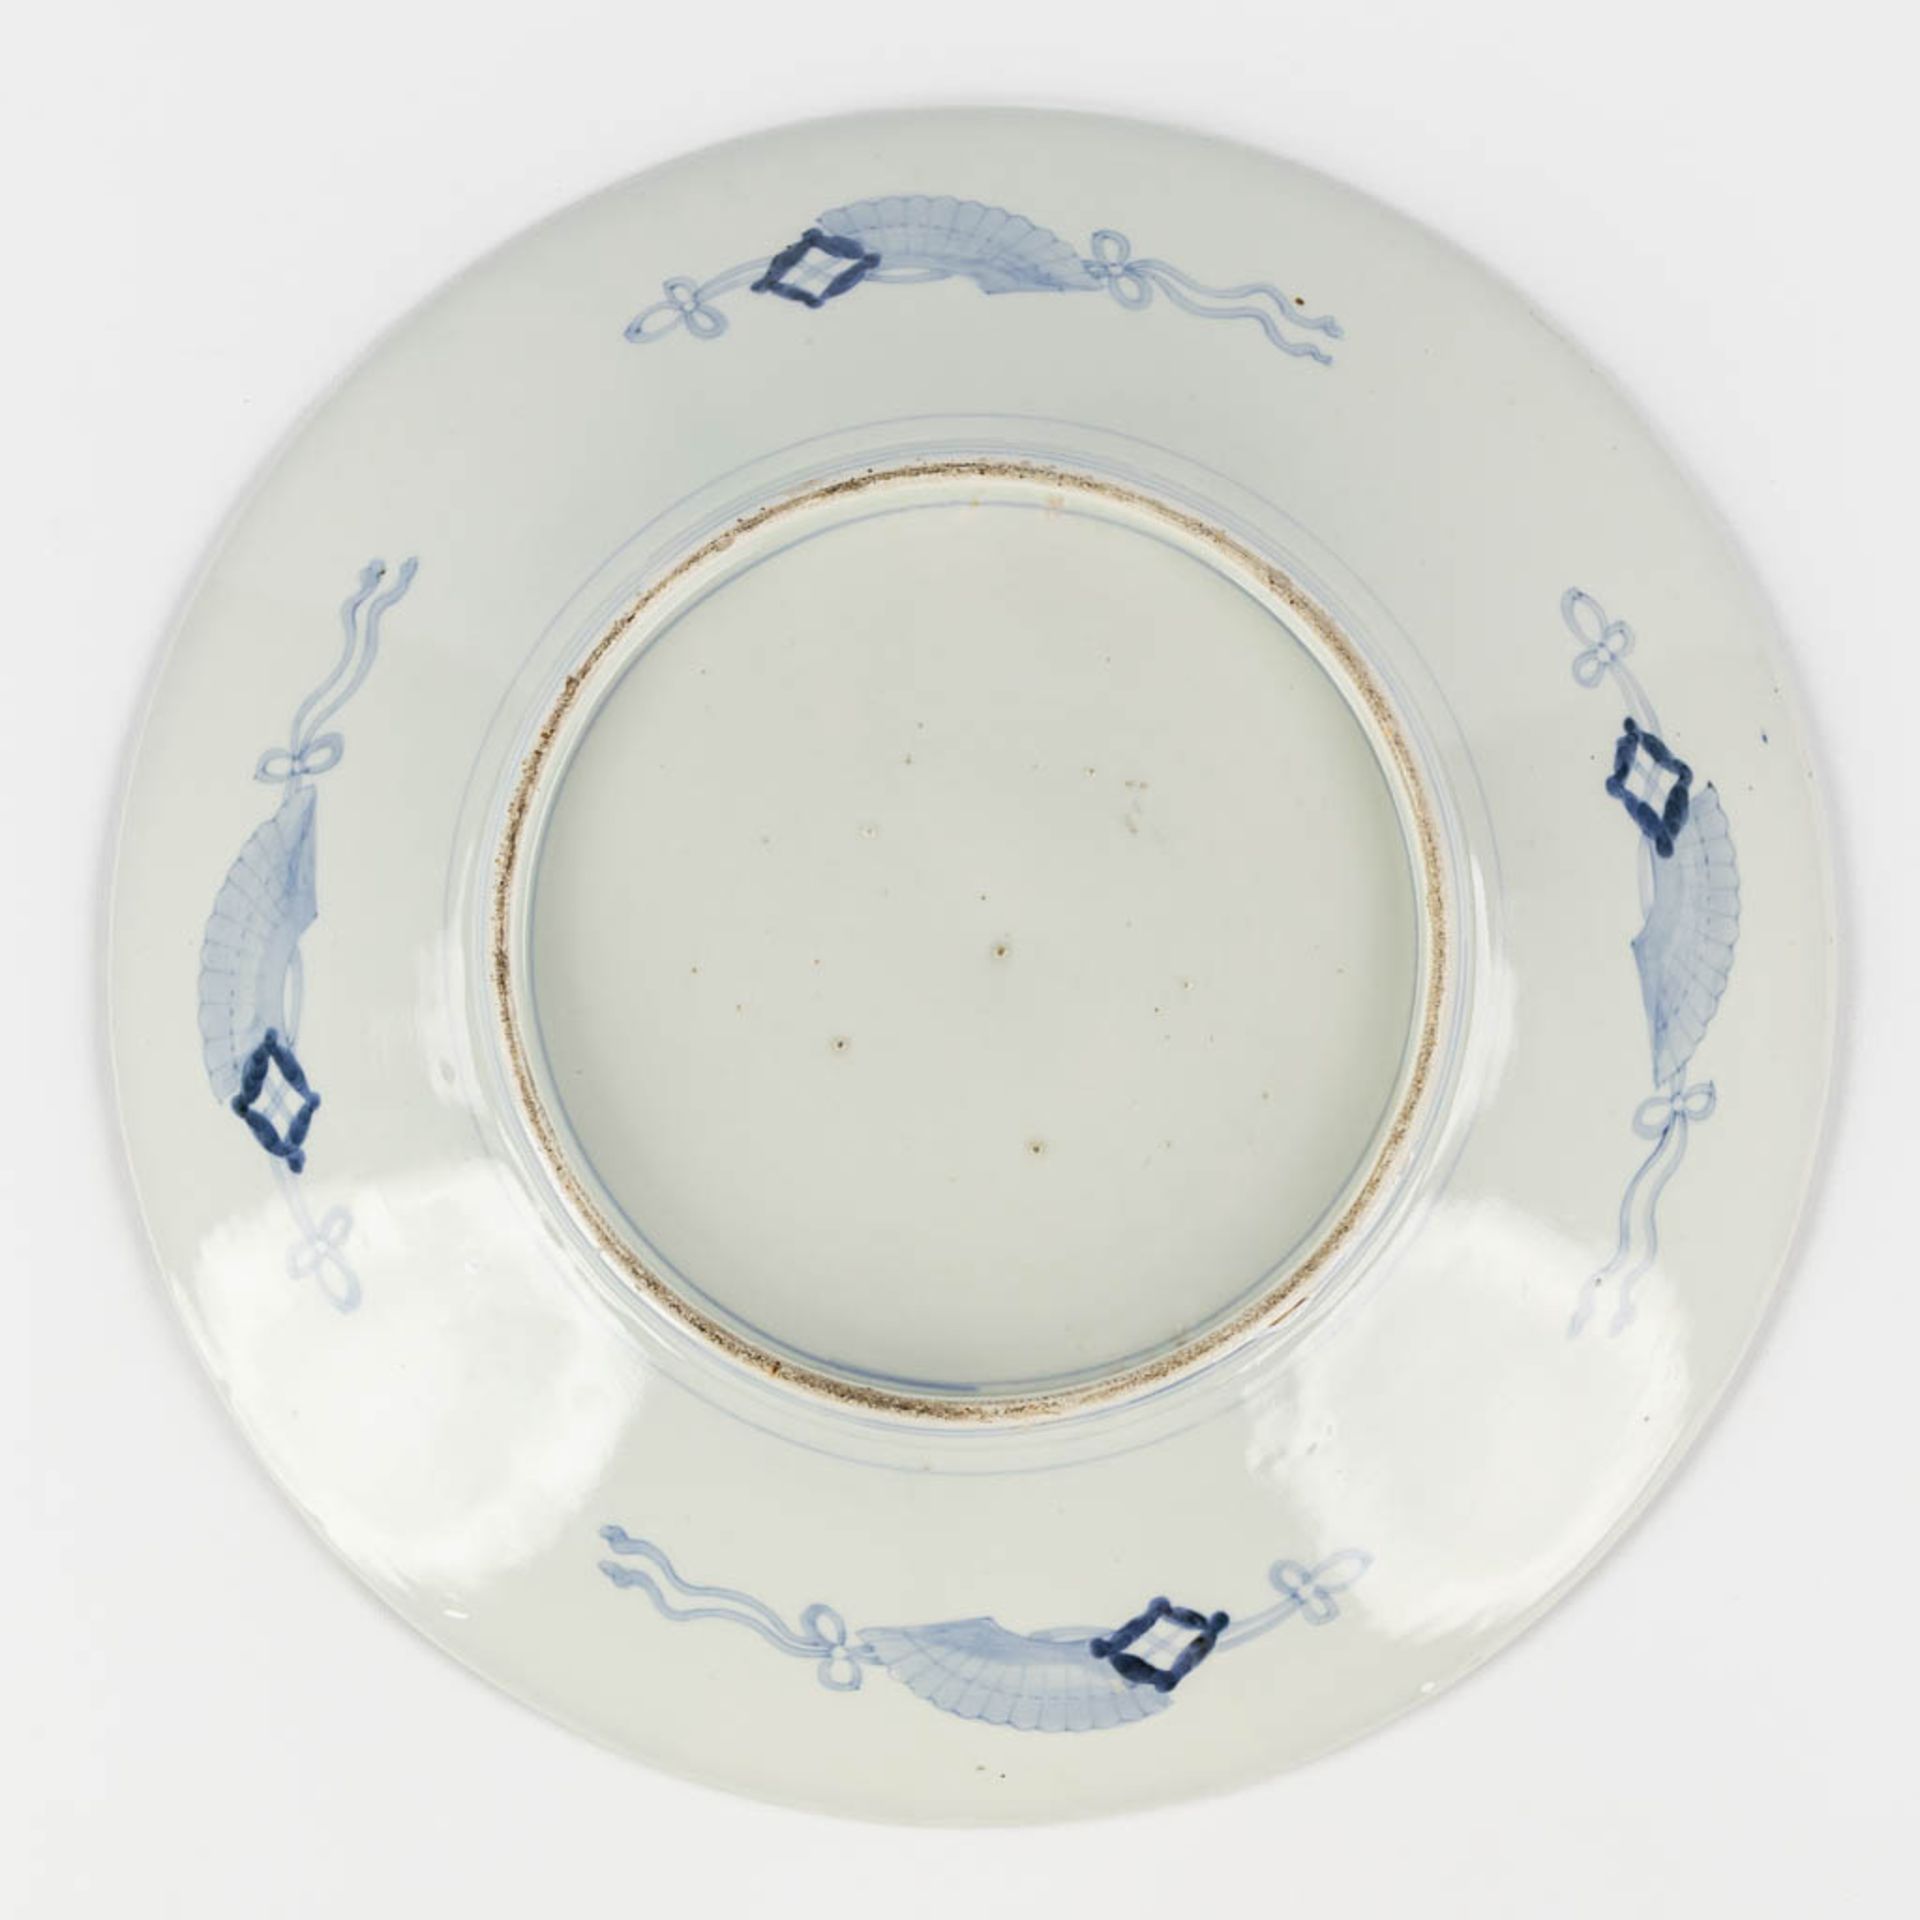 Two Japanese Imari and blue-white plates. 19th/20th C. (D:46 cm) - Image 7 of 14